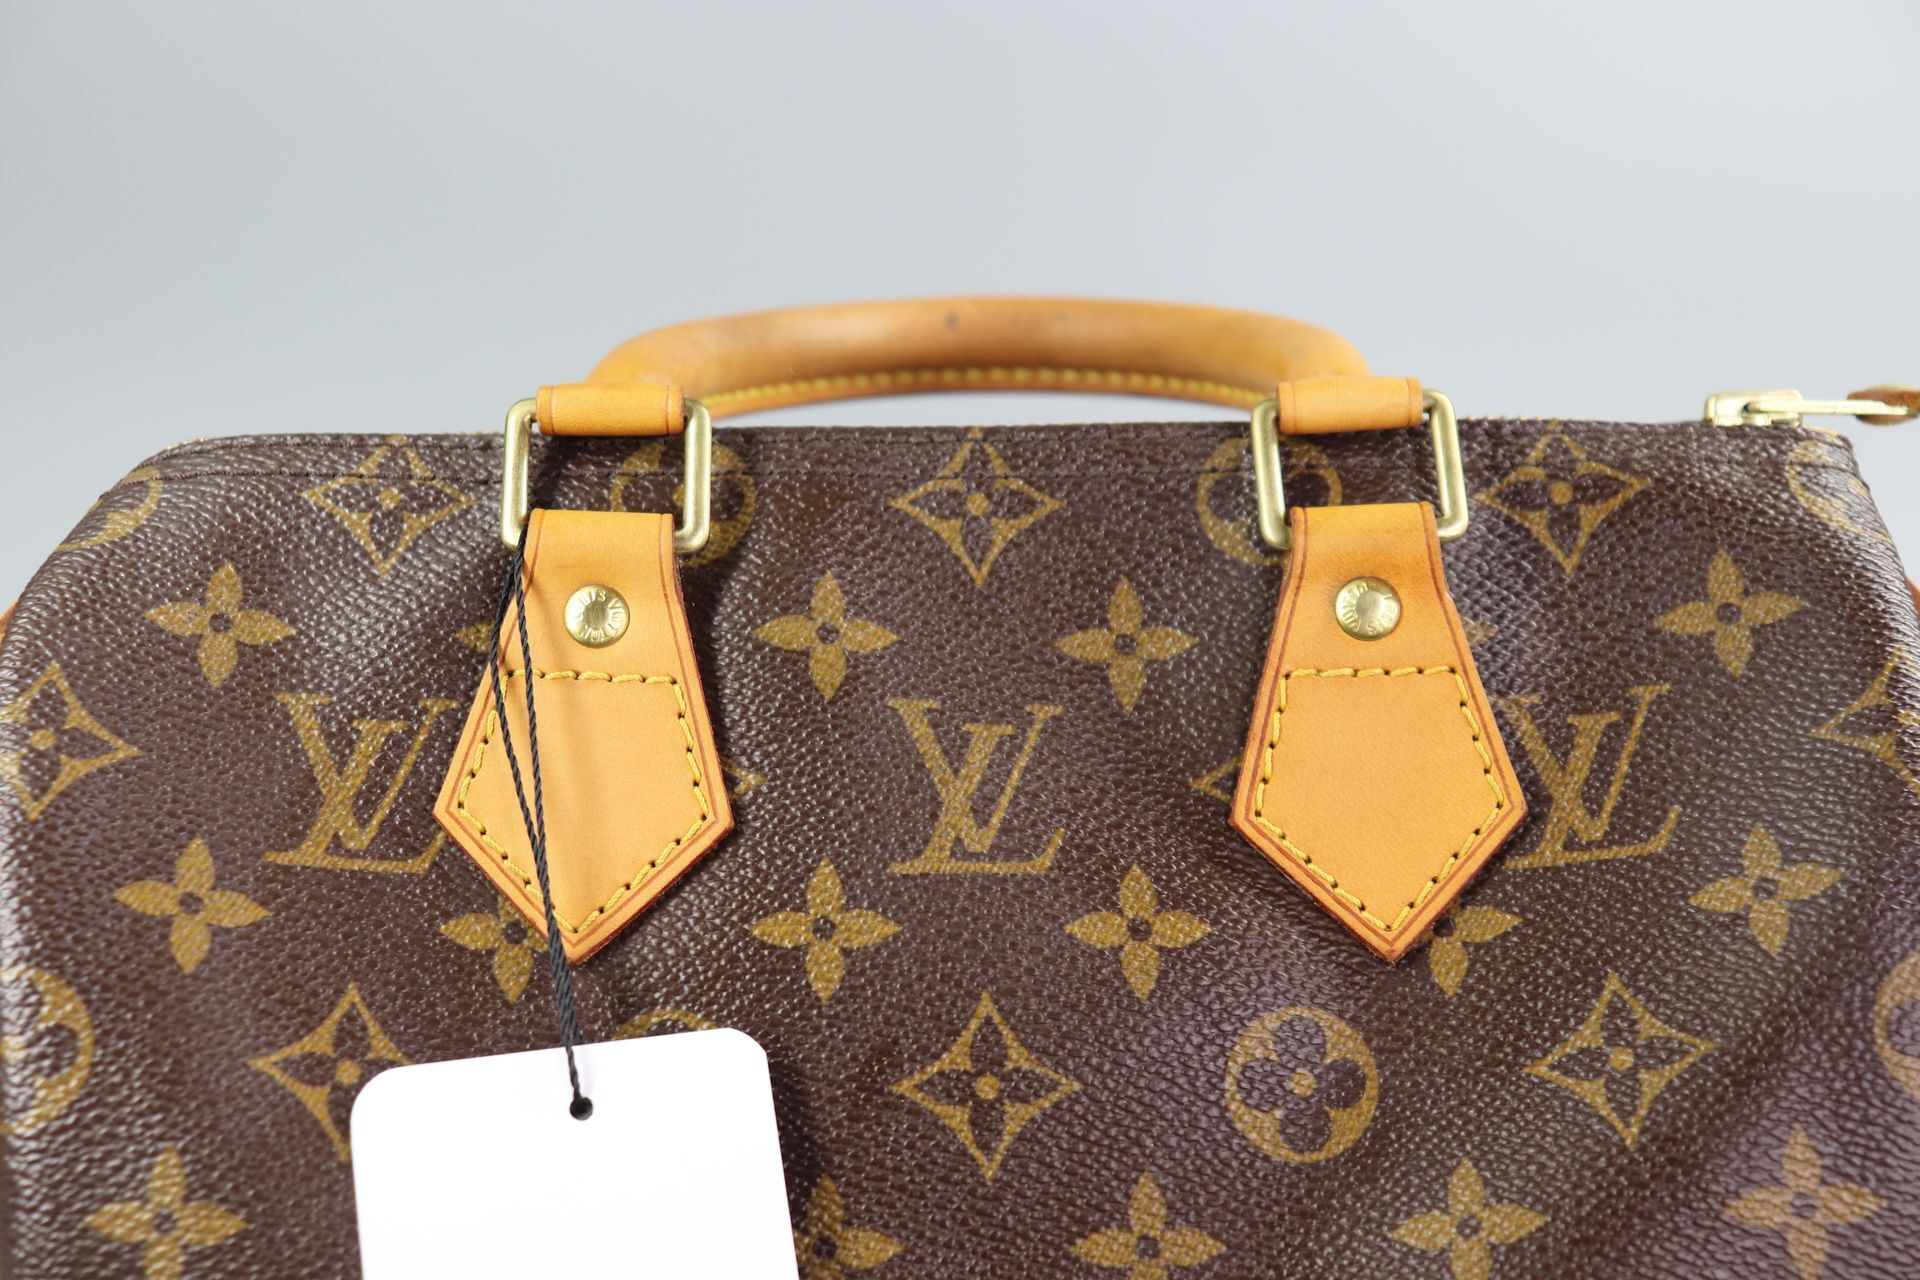 Speedy 25 with twilly and charm  Scarf on bag, Louis vuitton handbags, Louis  vuitton